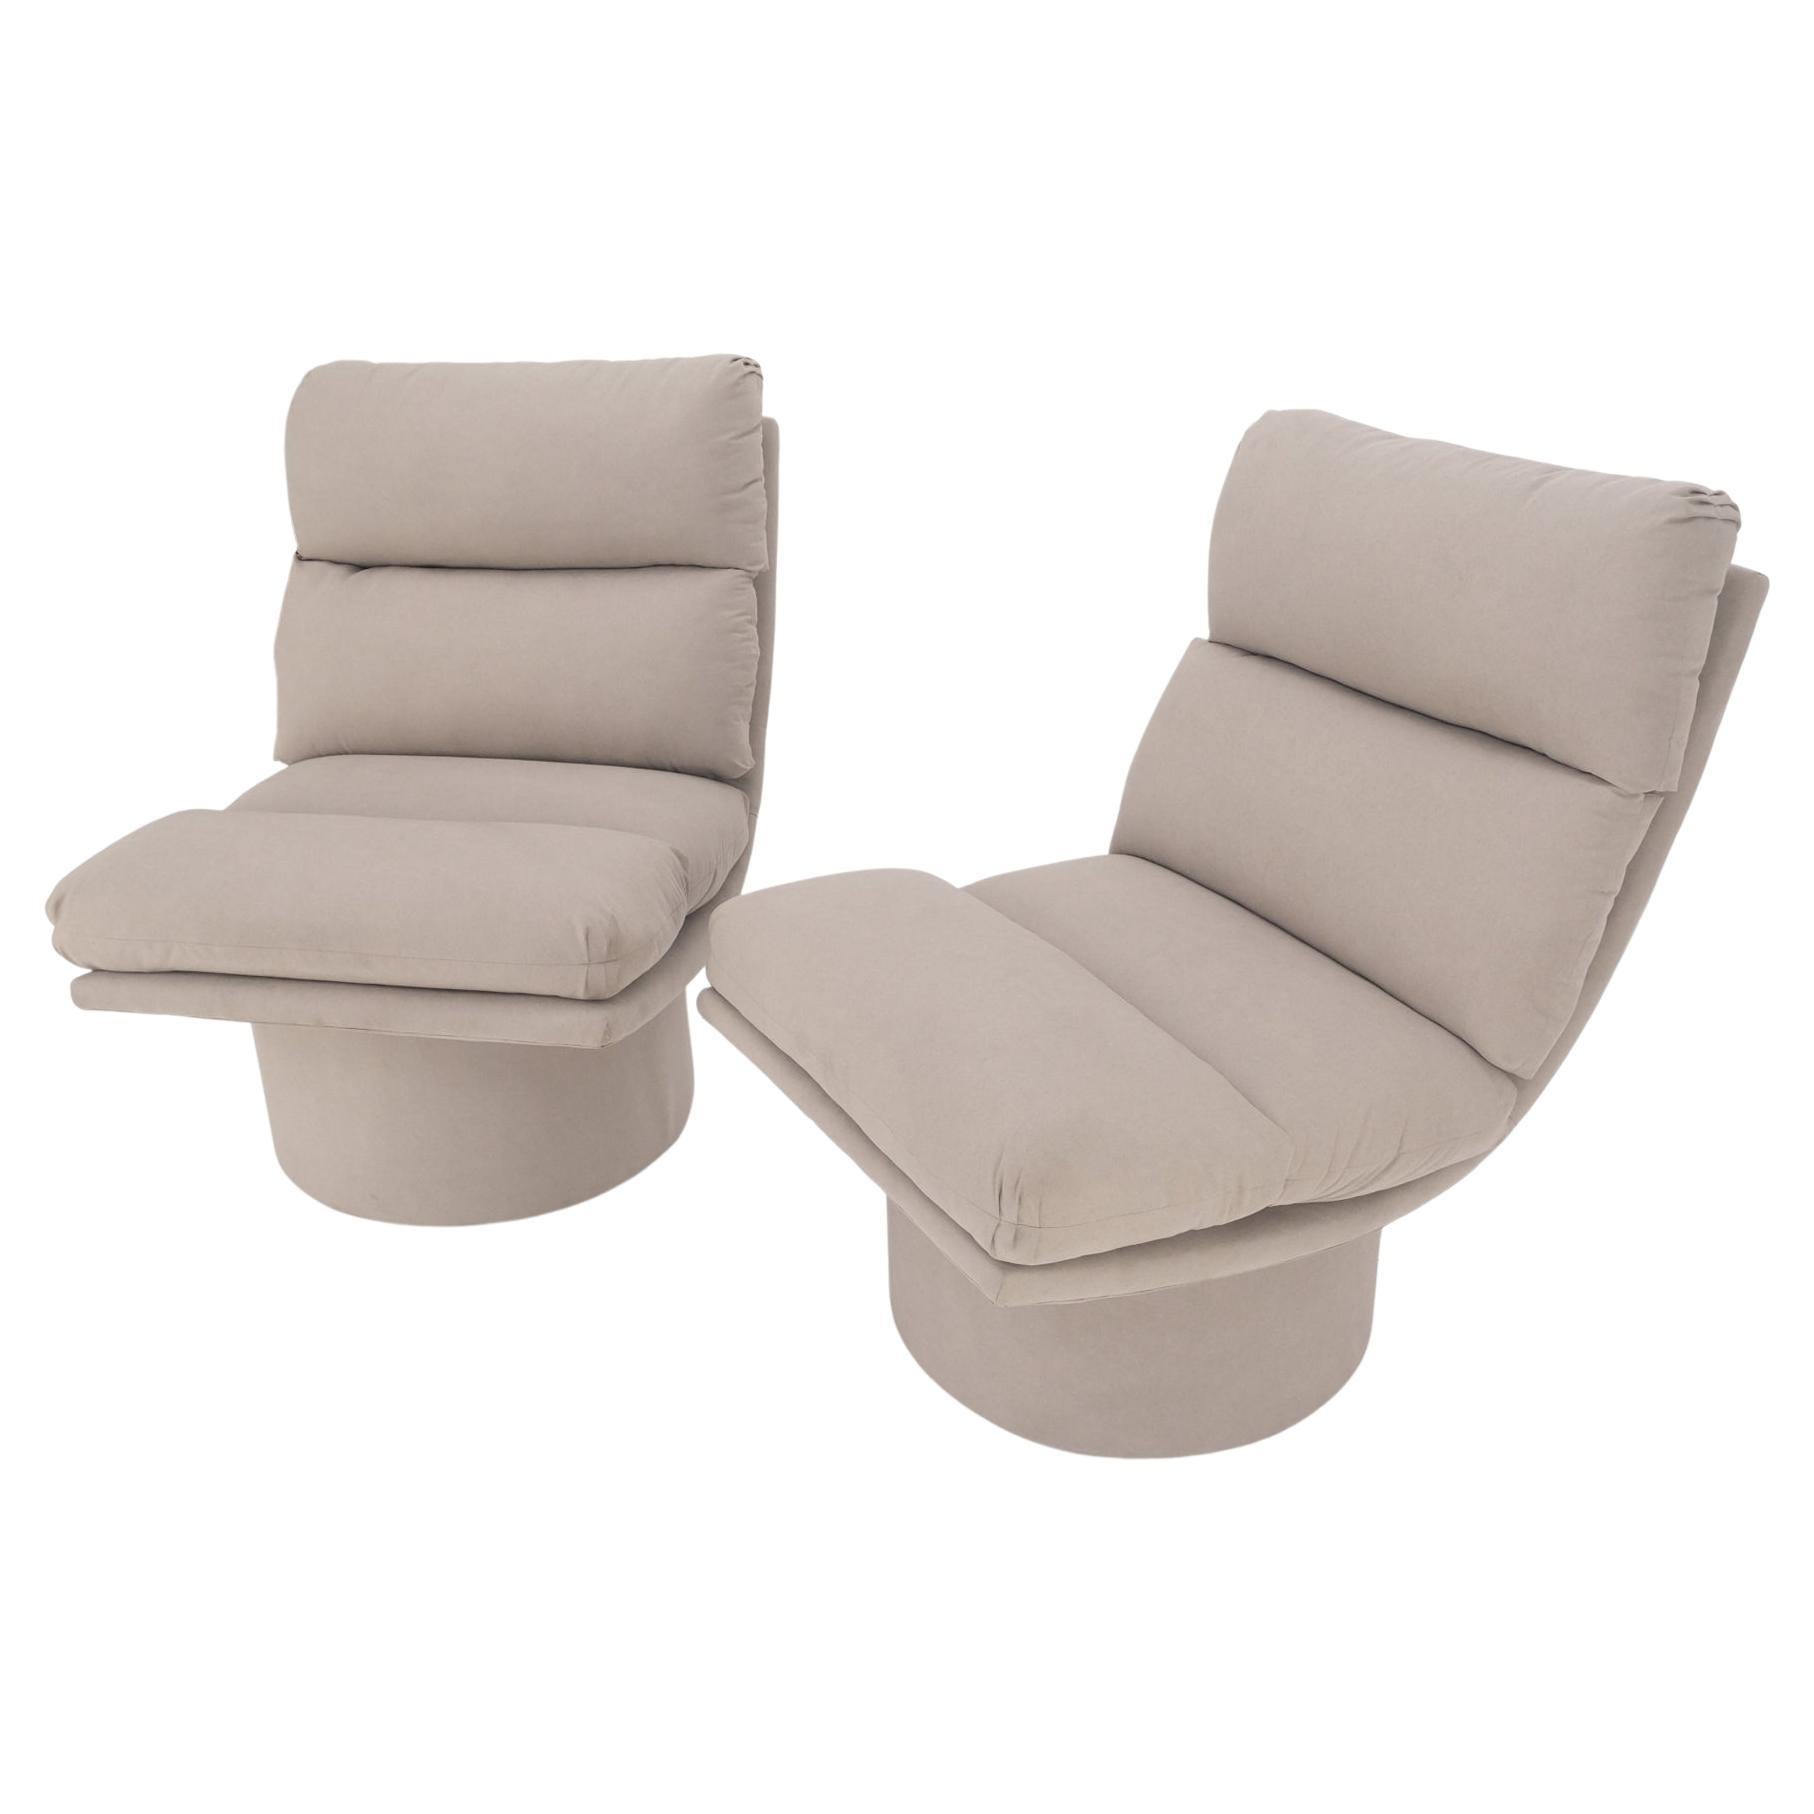 Pair New Light Coffee to Grey Alcantera Upholstery Scoop Lounge Chairs SHARP! For Sale